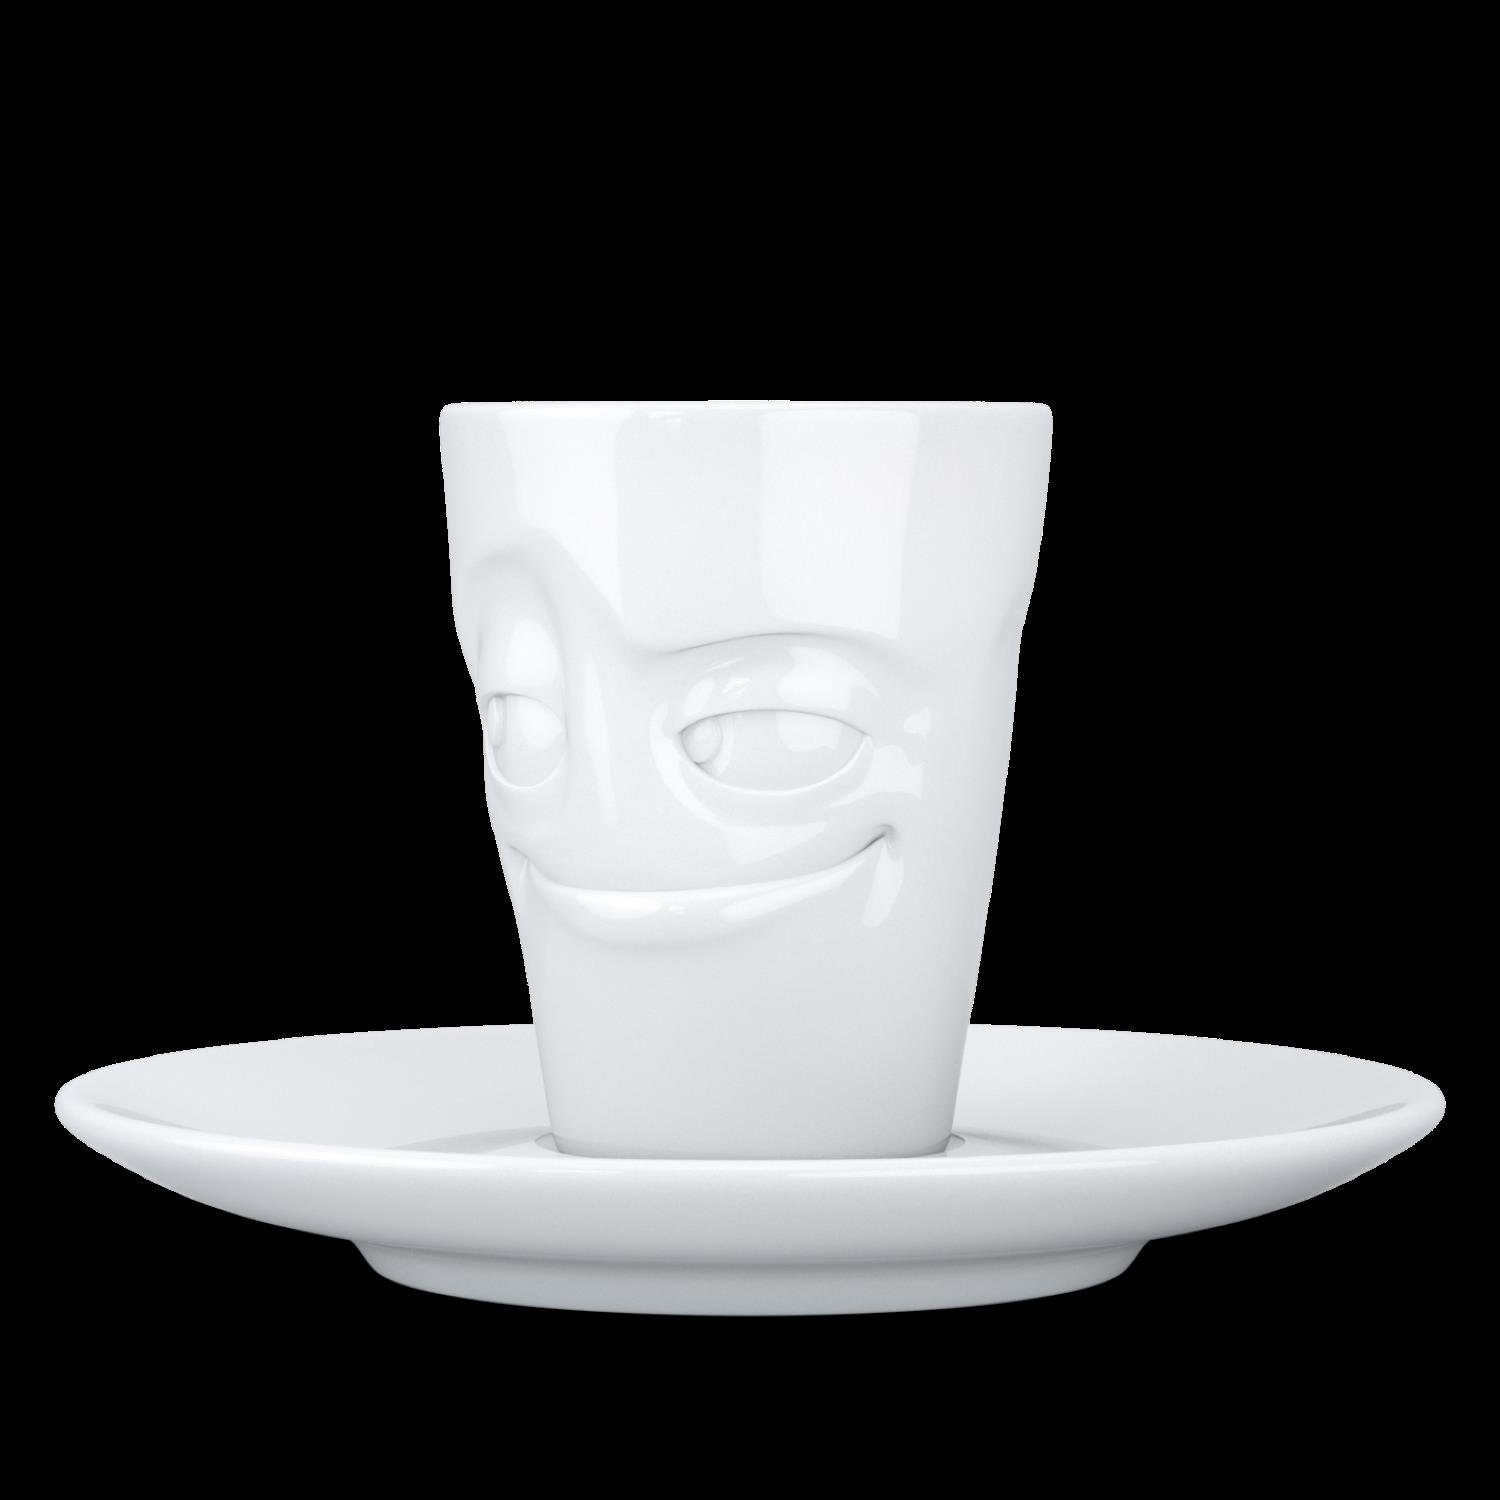 Fiftyeight Tasse Products Espresso mit FIFTYEIGHT - Henkel PRODUCTS Mug